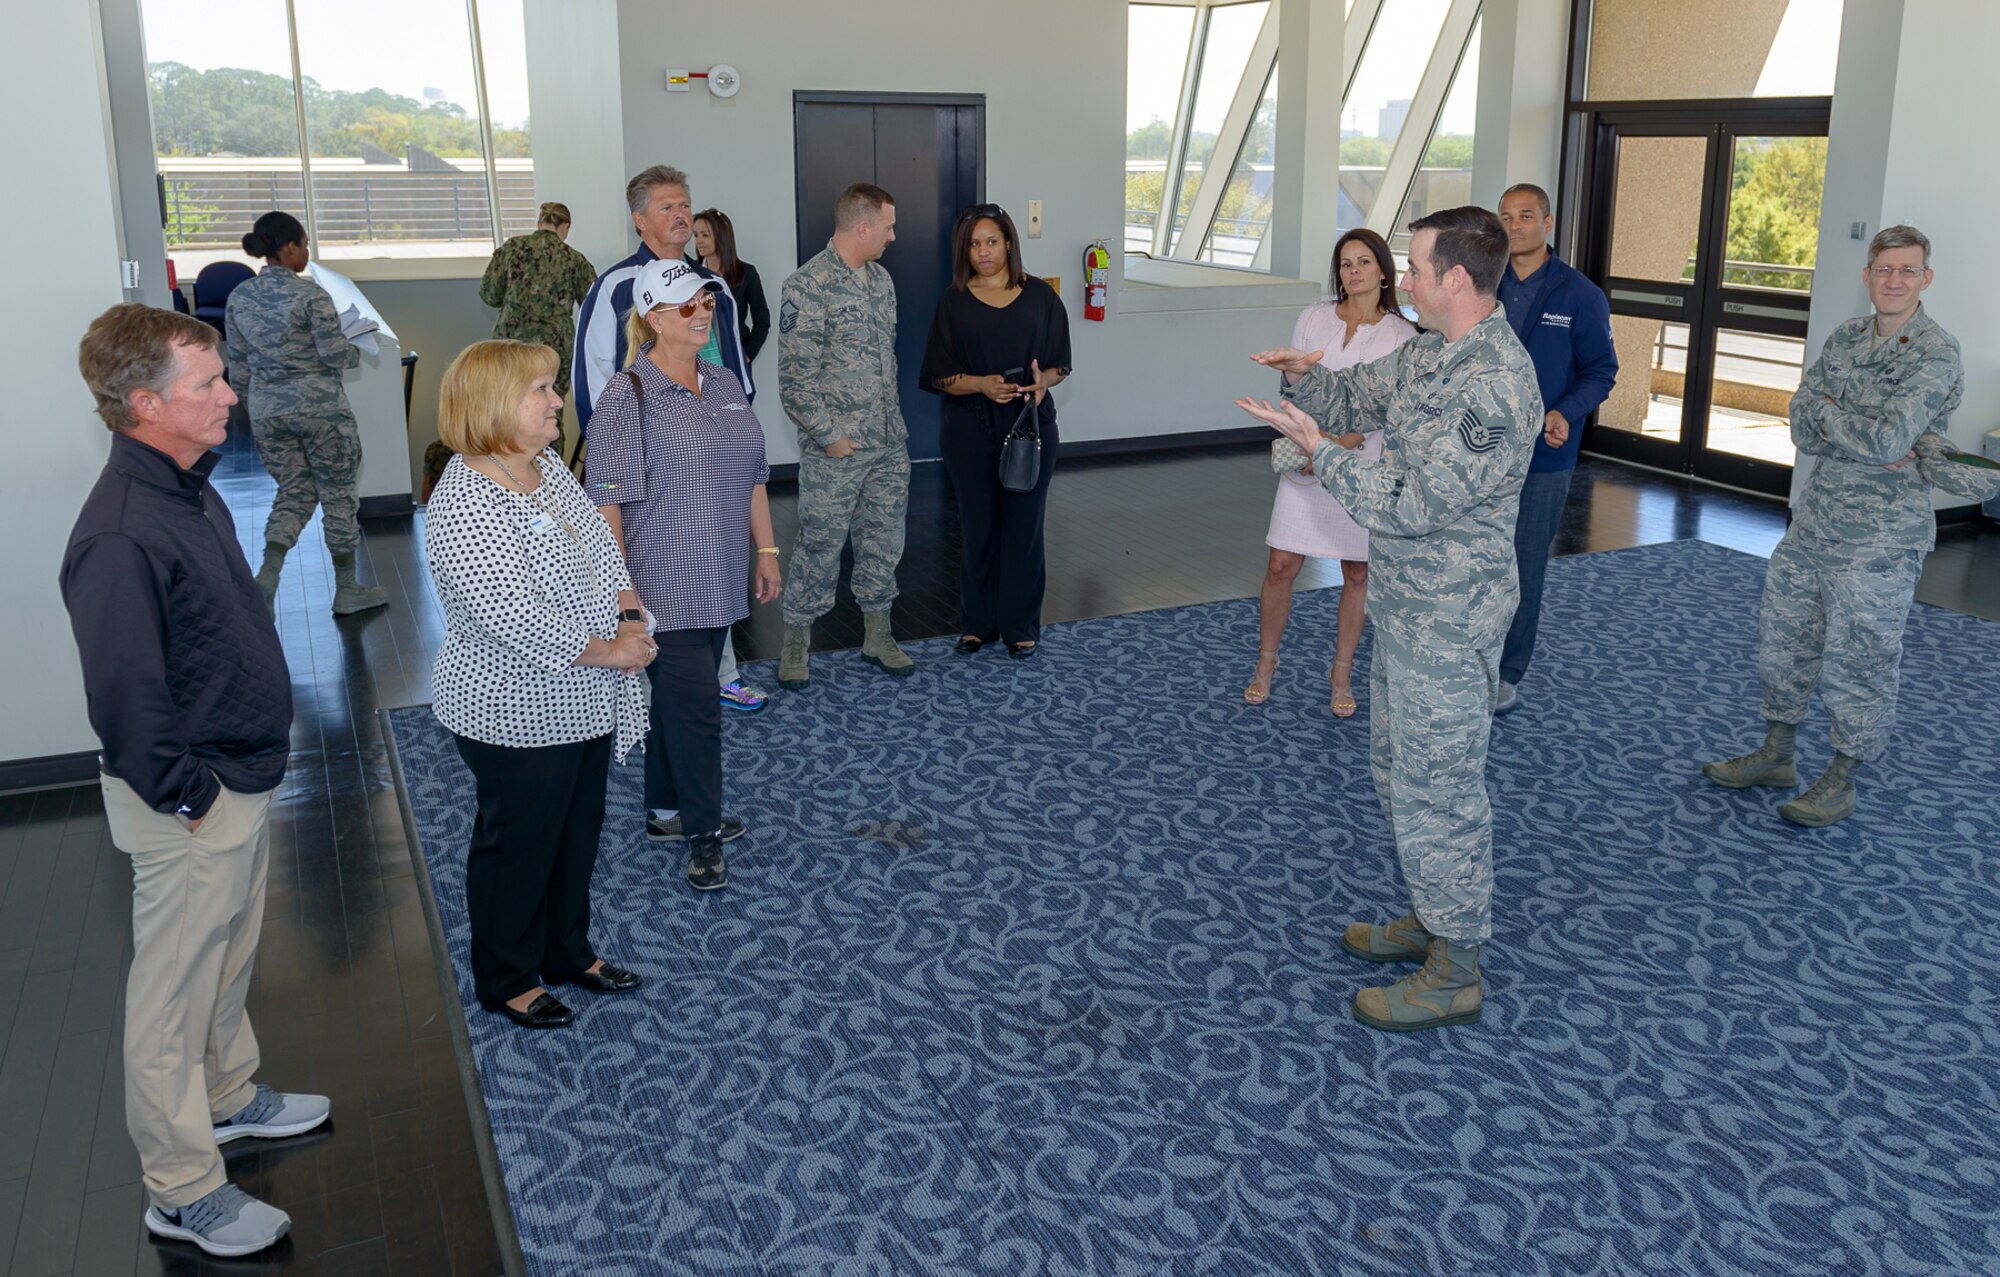 U.S. Air Force Tech. Sgt. Jacob Hail, 335th Training Squadron weather initial skills instructor, briefs the Professional Golf Association Tour champions and their wives during the Rapiscan System Golf Classic players’ tour March 20, 2018, on Keesler Air Force Base, Mississippi. The attending golfers who are participating in the 2018 Rapiscan System Golf Classic also toured the 53rd Weather Reconnaissance Squadron and the military working dog kennel. (U.S. Air Force photo by André Askew)